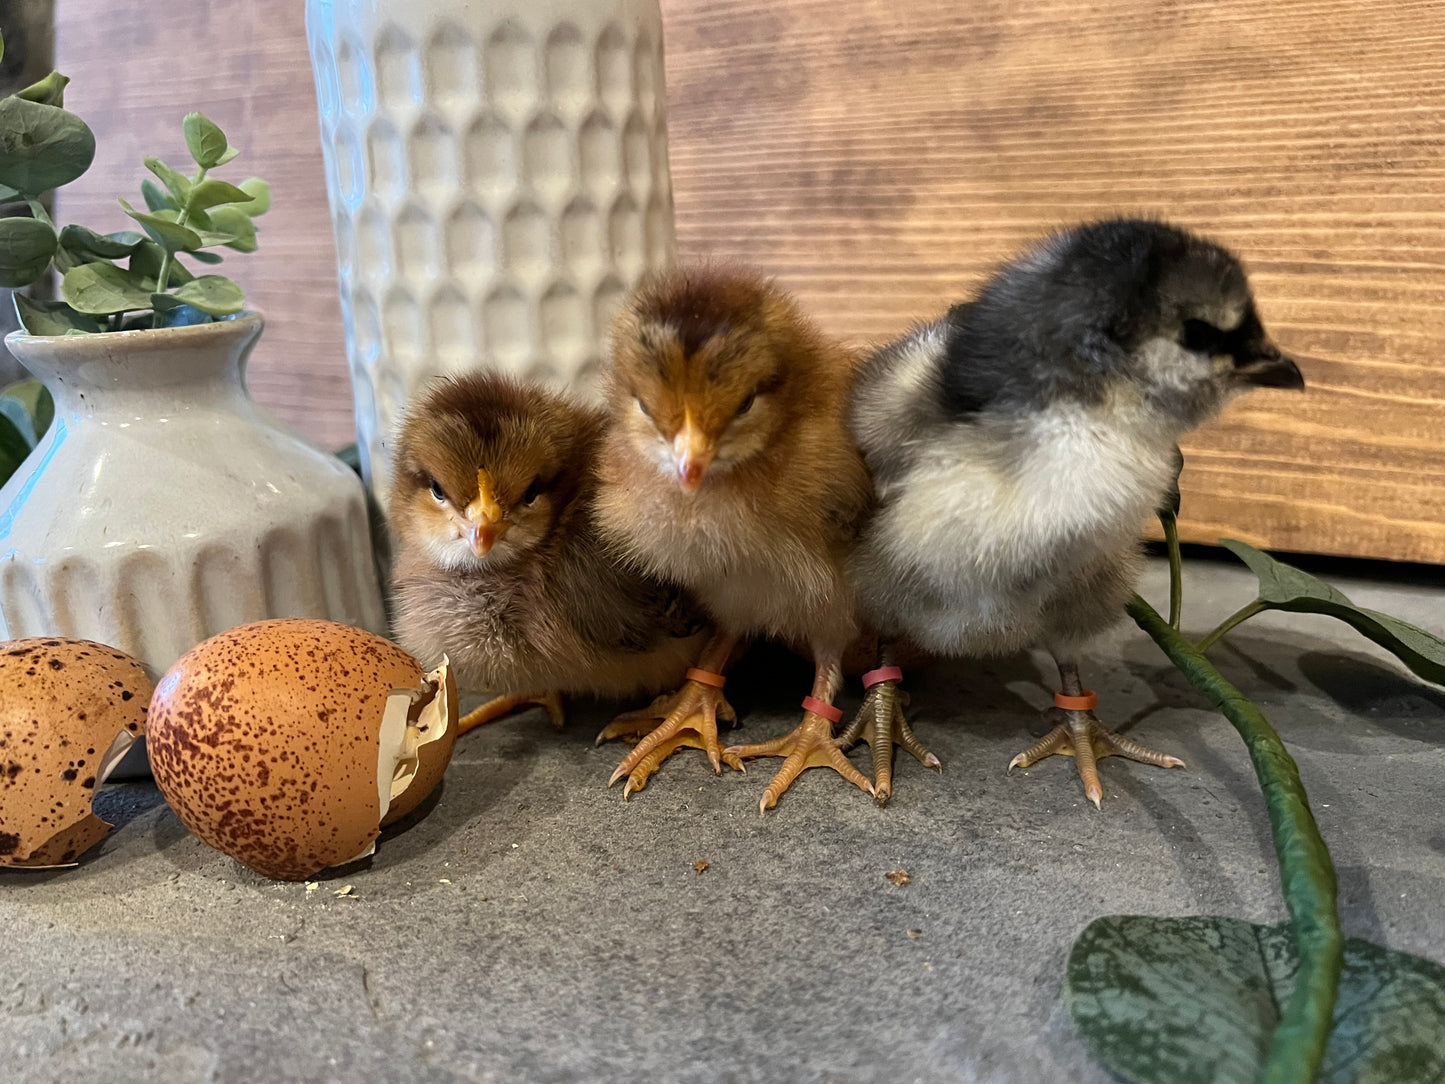 Speckled Project Pen Chicks- Minimum of 3 chicks